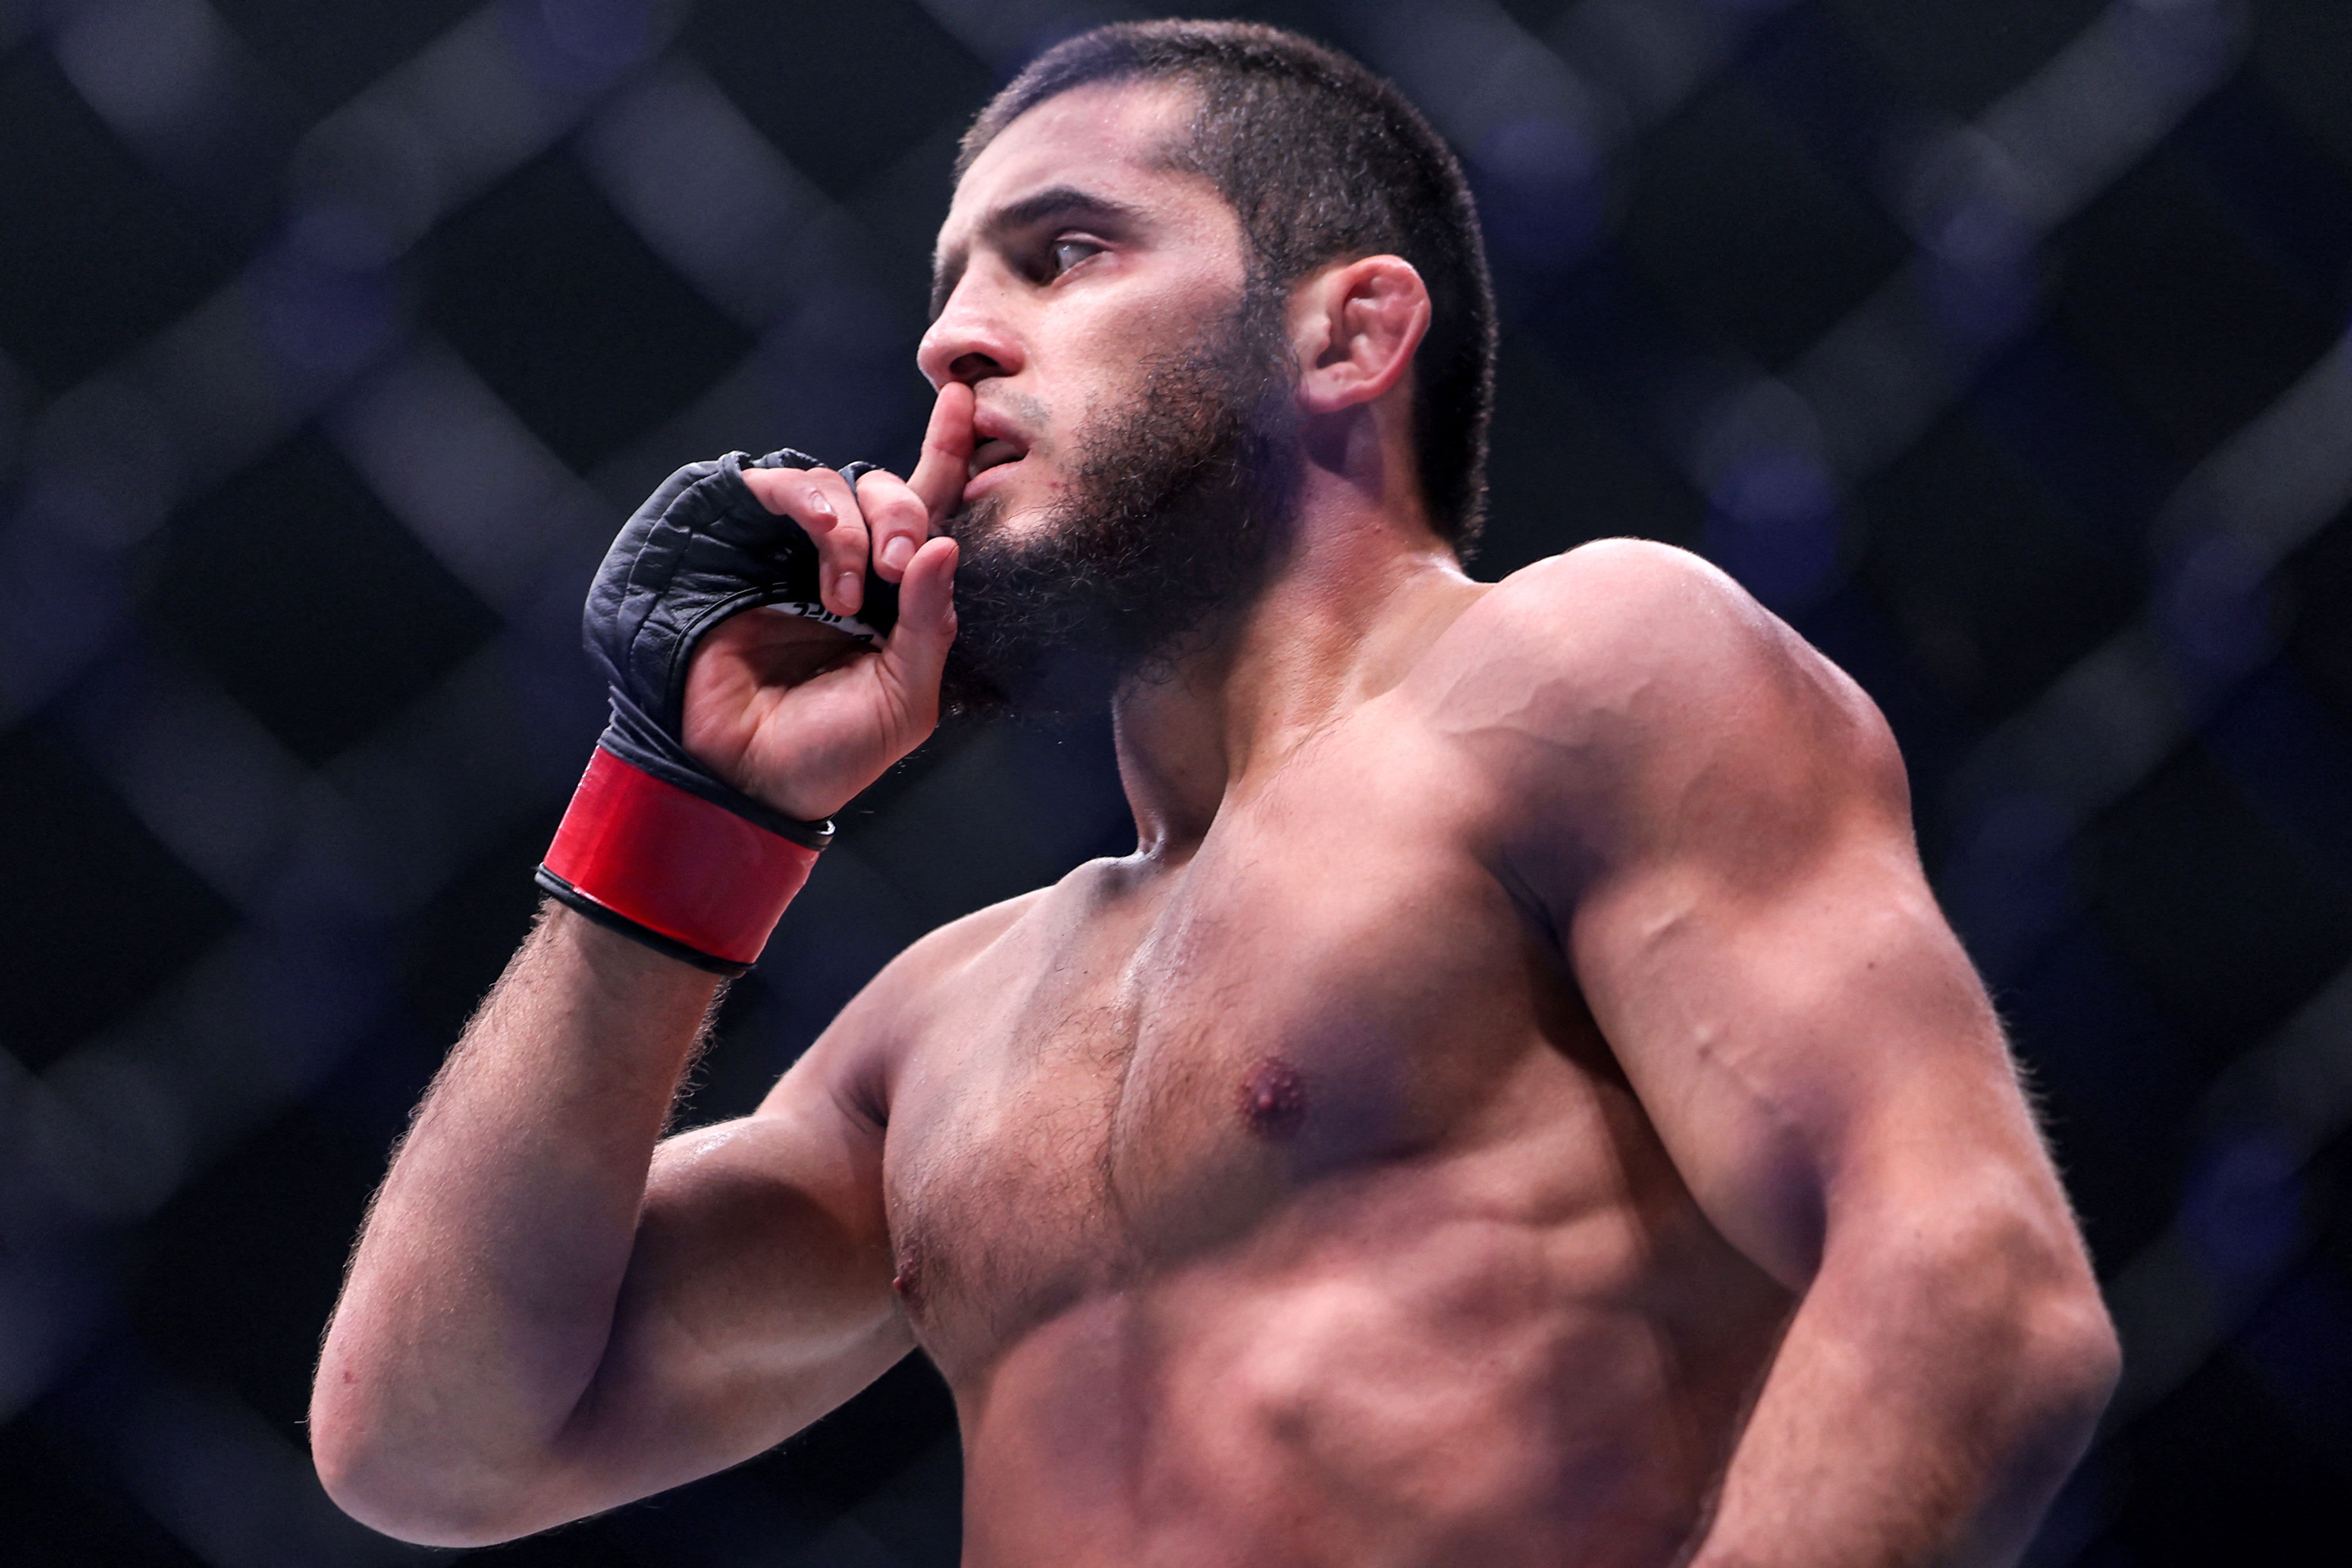 How to watch UFC 302: Islam Makhachev vs. Dustin Poirier fight card details, start times and more